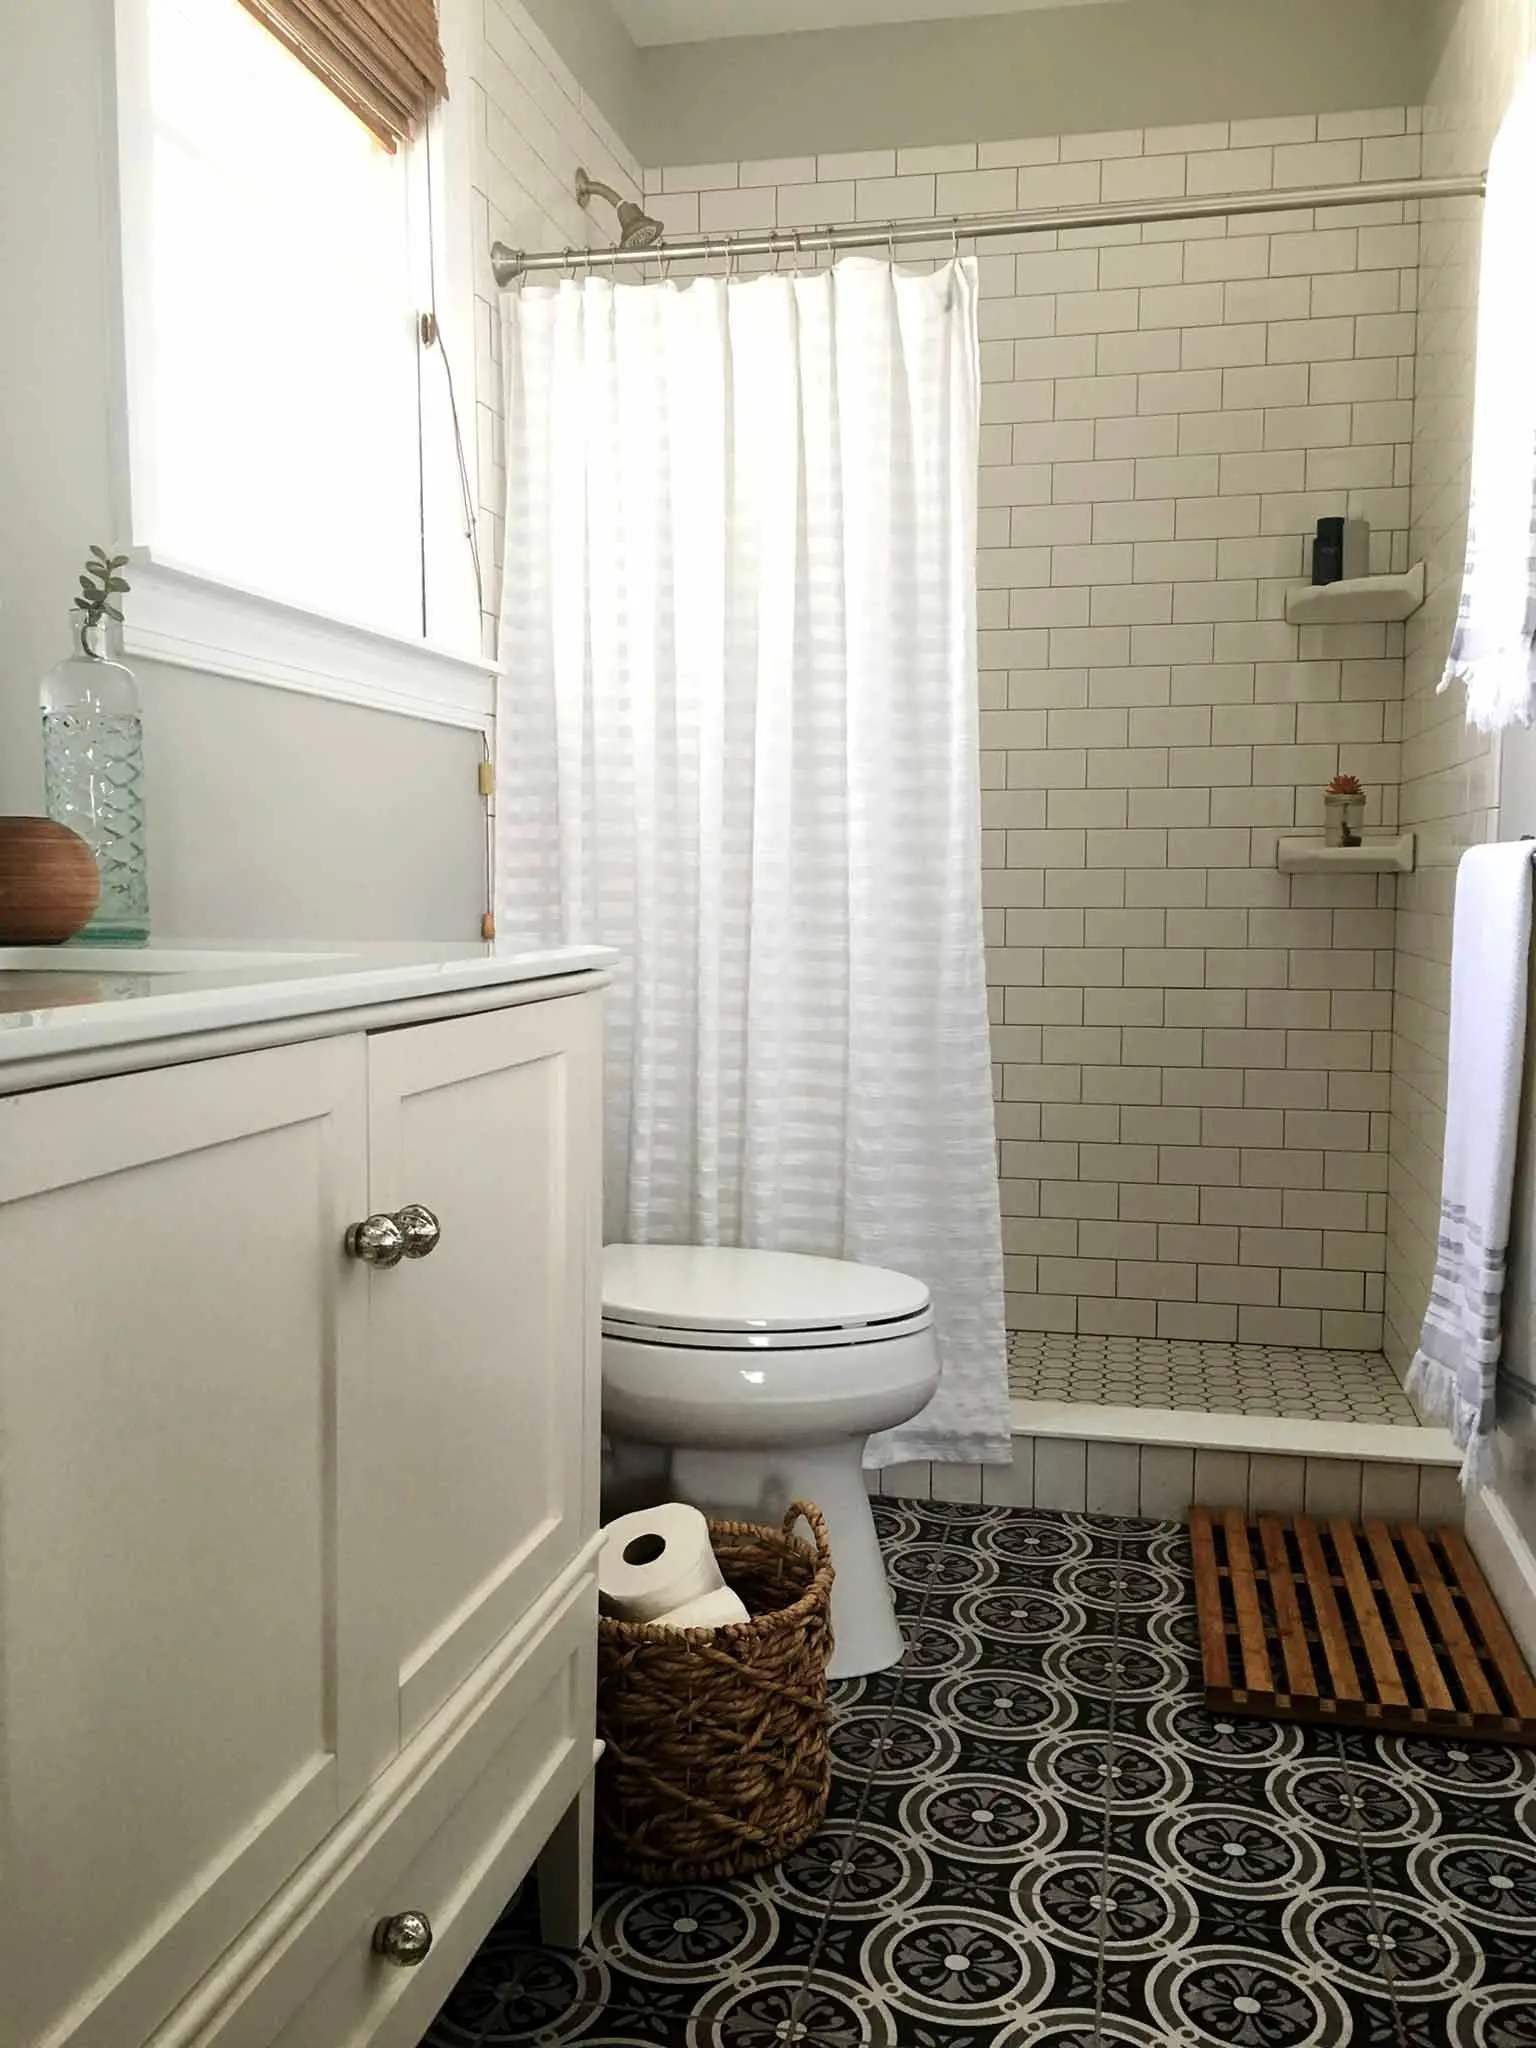 Bathroom with patterned ceramic floor tile, white subway tile and white vanity - That Homebird Life Blog